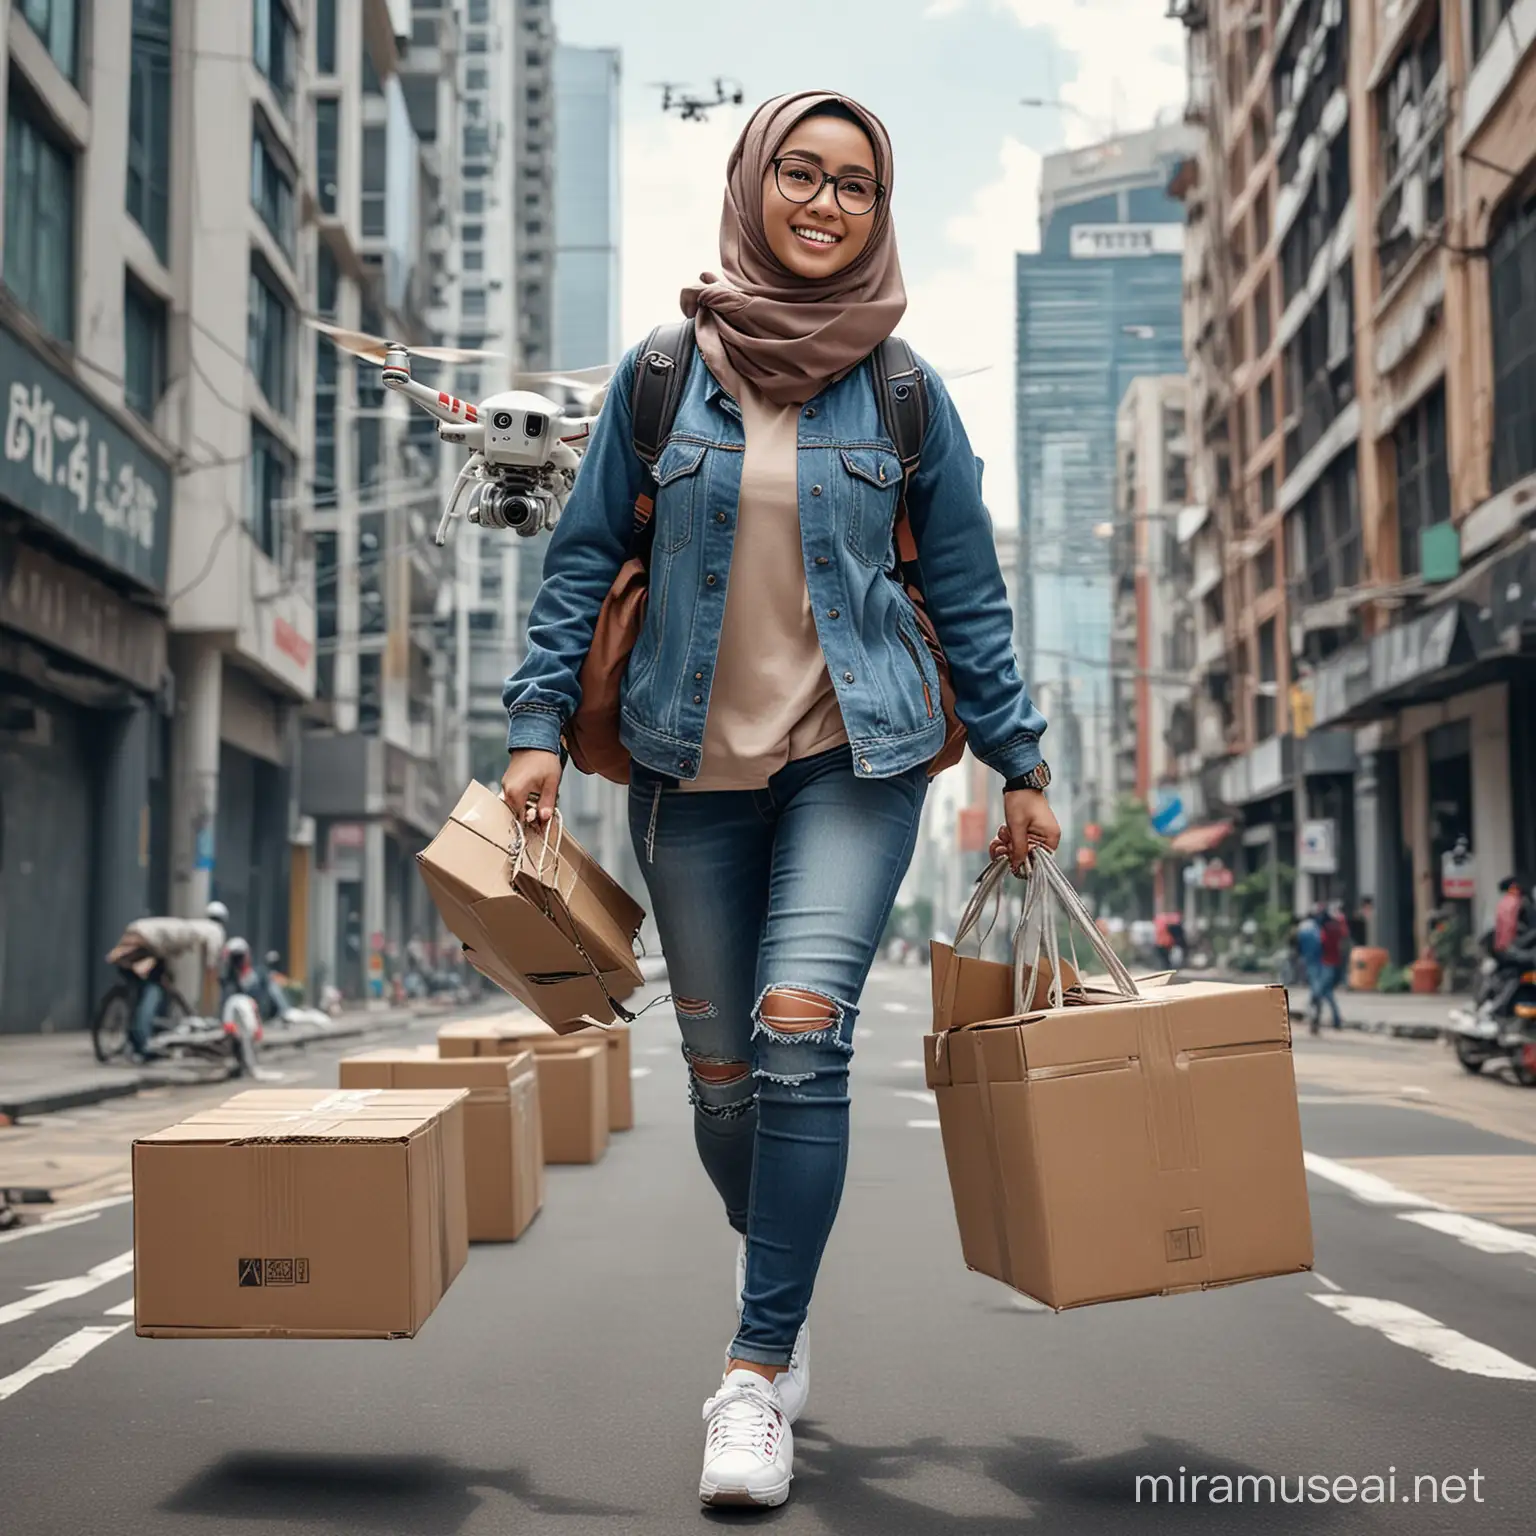 create a realistic picture of indonesian beautiful woman, wearing hijab and glasses, clean face, and smilling, wearing casual clothes with a jeans jacket and sneakers, carrying a backpack on her back, riding a large, sophisticated and futuristic drone that is flying forward, on top of the drone there are boxes piled up on ropes, background of city streets with high-rise buildings